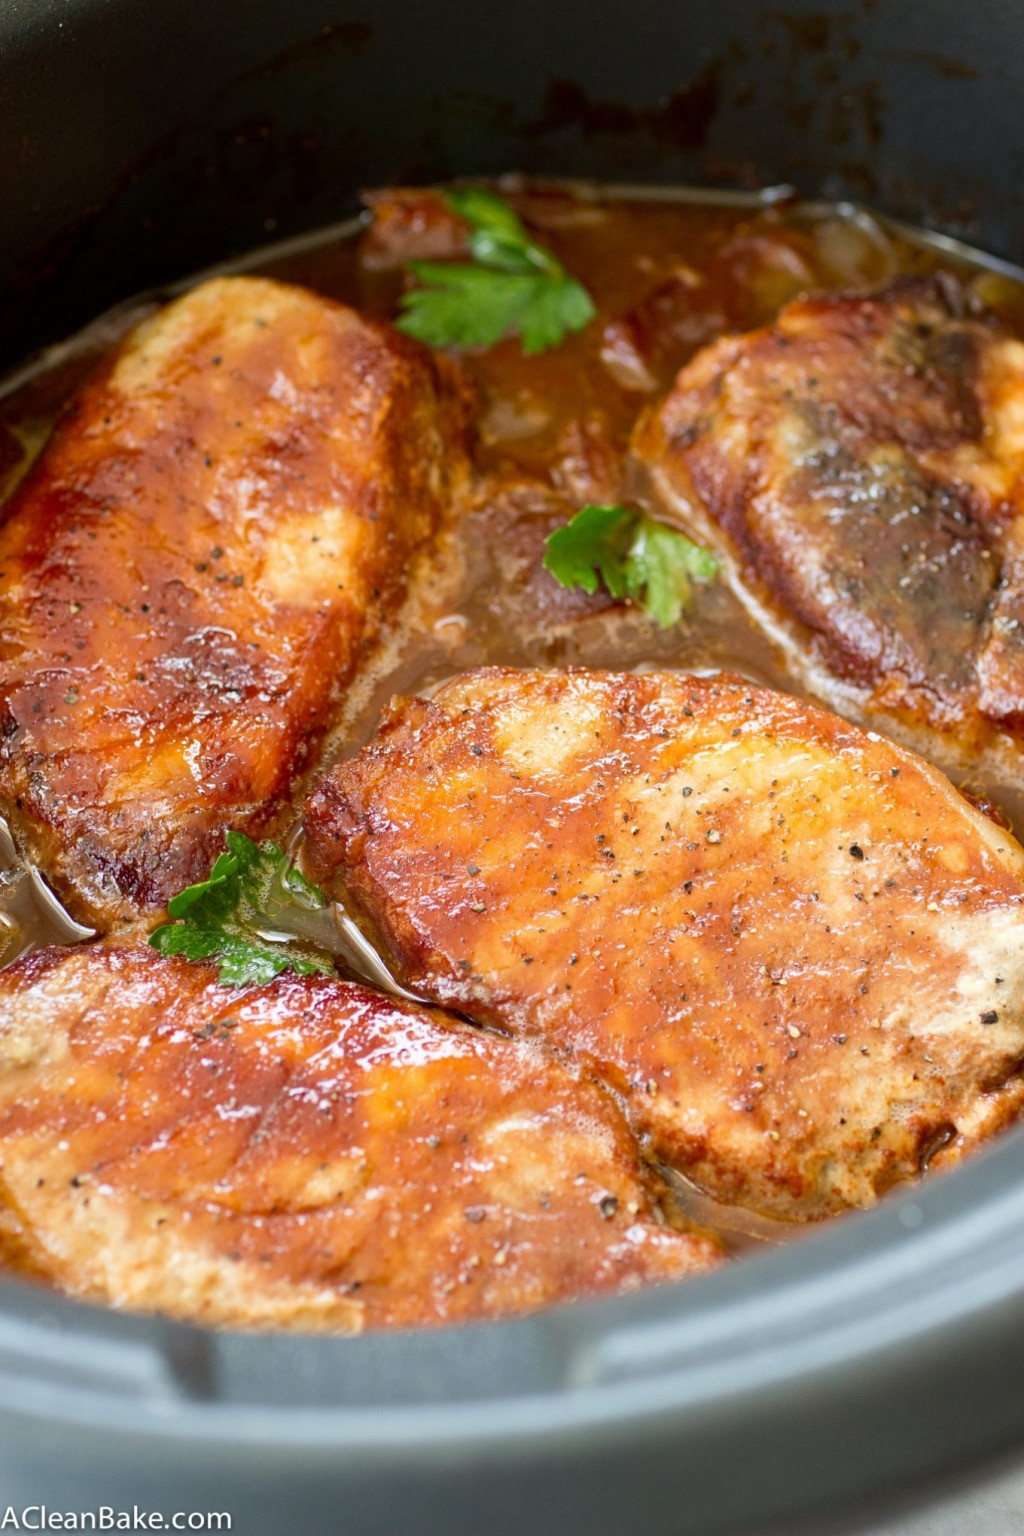 Campbell Soup Recipes For Pork Chops
 Crockpot Pork Chops with Apples and ions